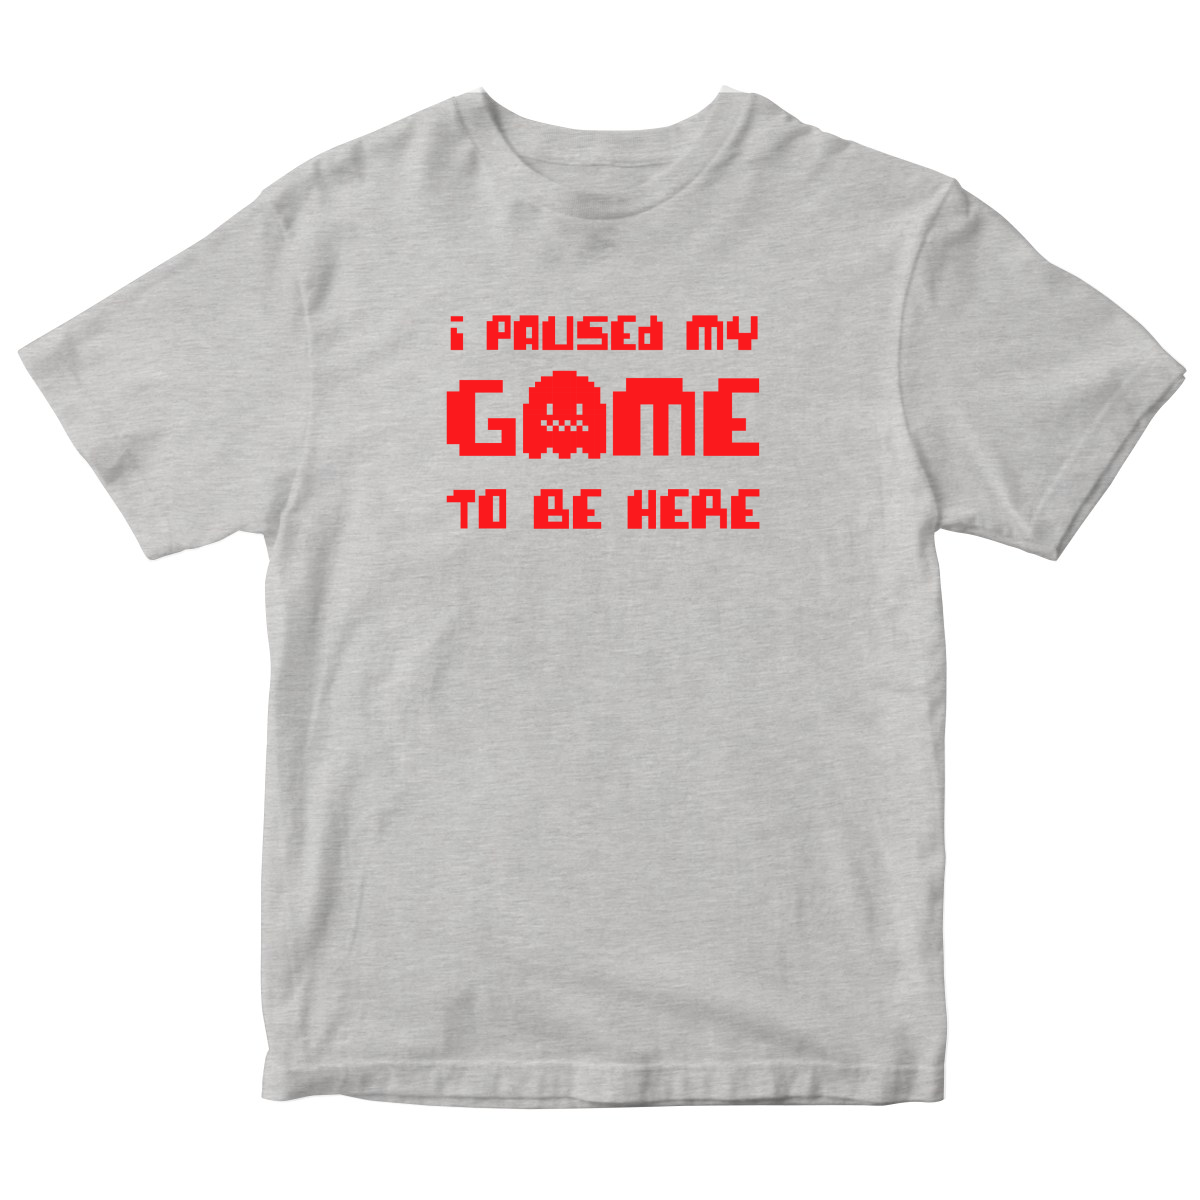 I Paused My Game To Be Here  Kids T-shirt | Gray